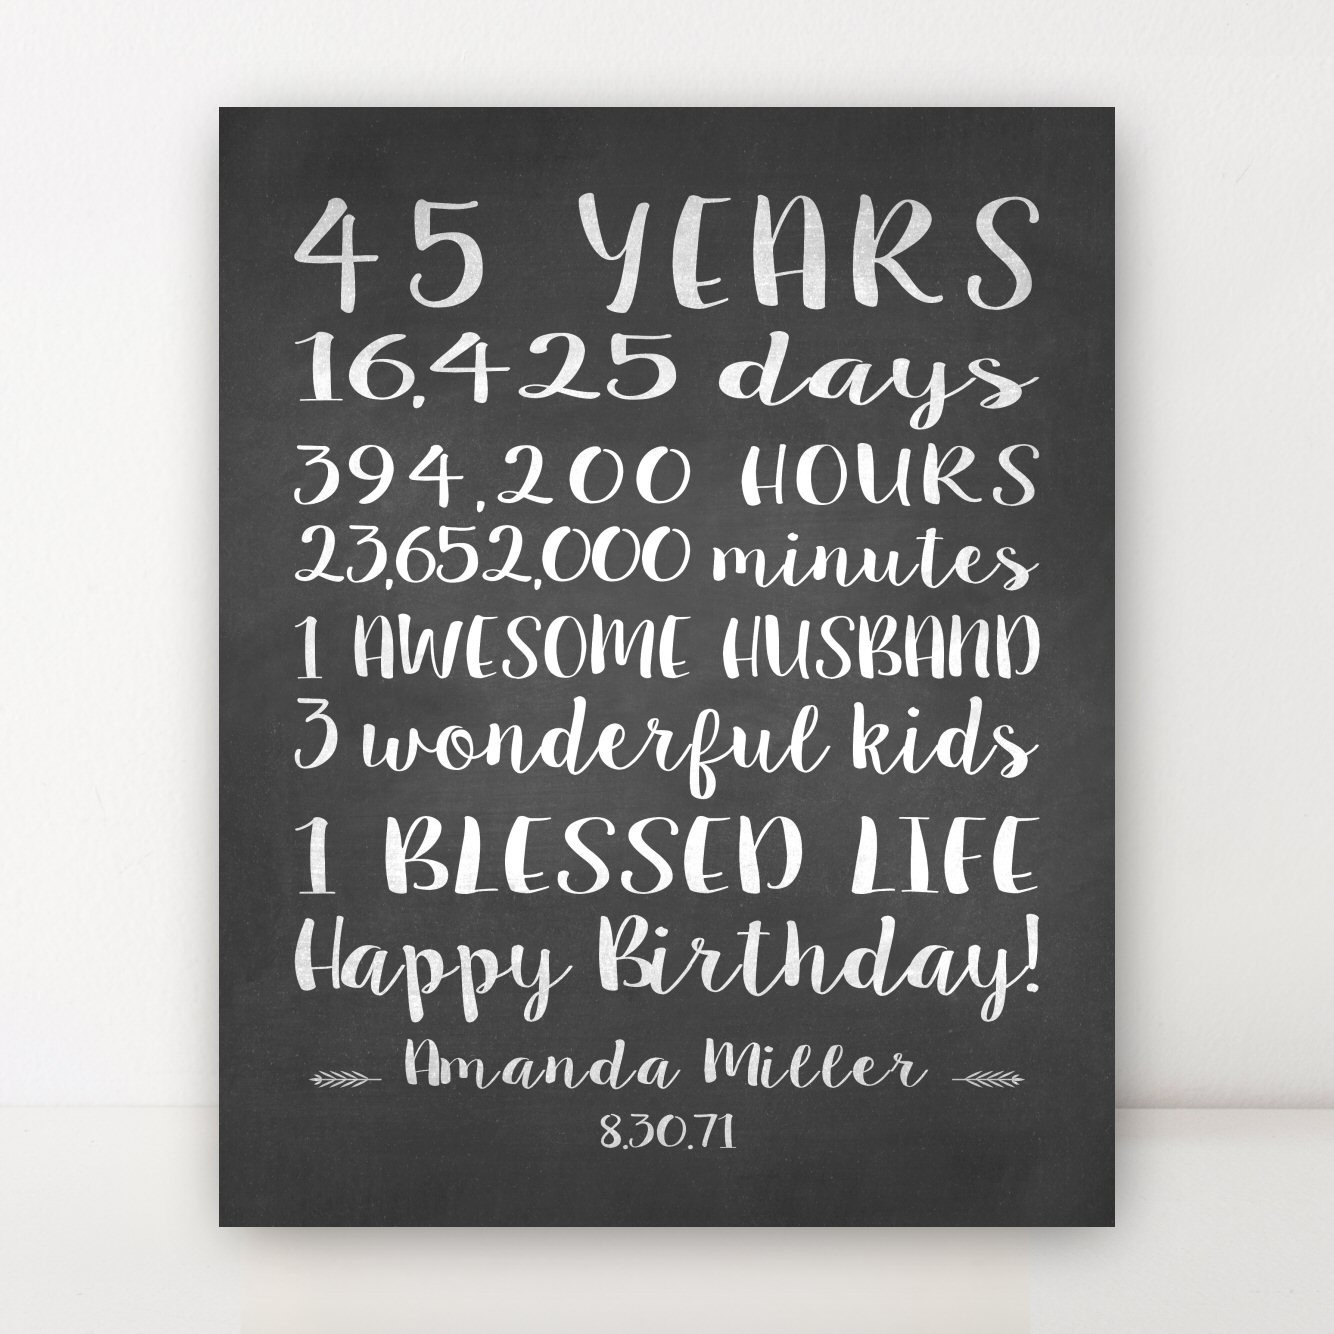 45th Birthday Party Ideas
 45th BIRTHDAY GIFT Canvas 45 Year Birthday Sign Personalized